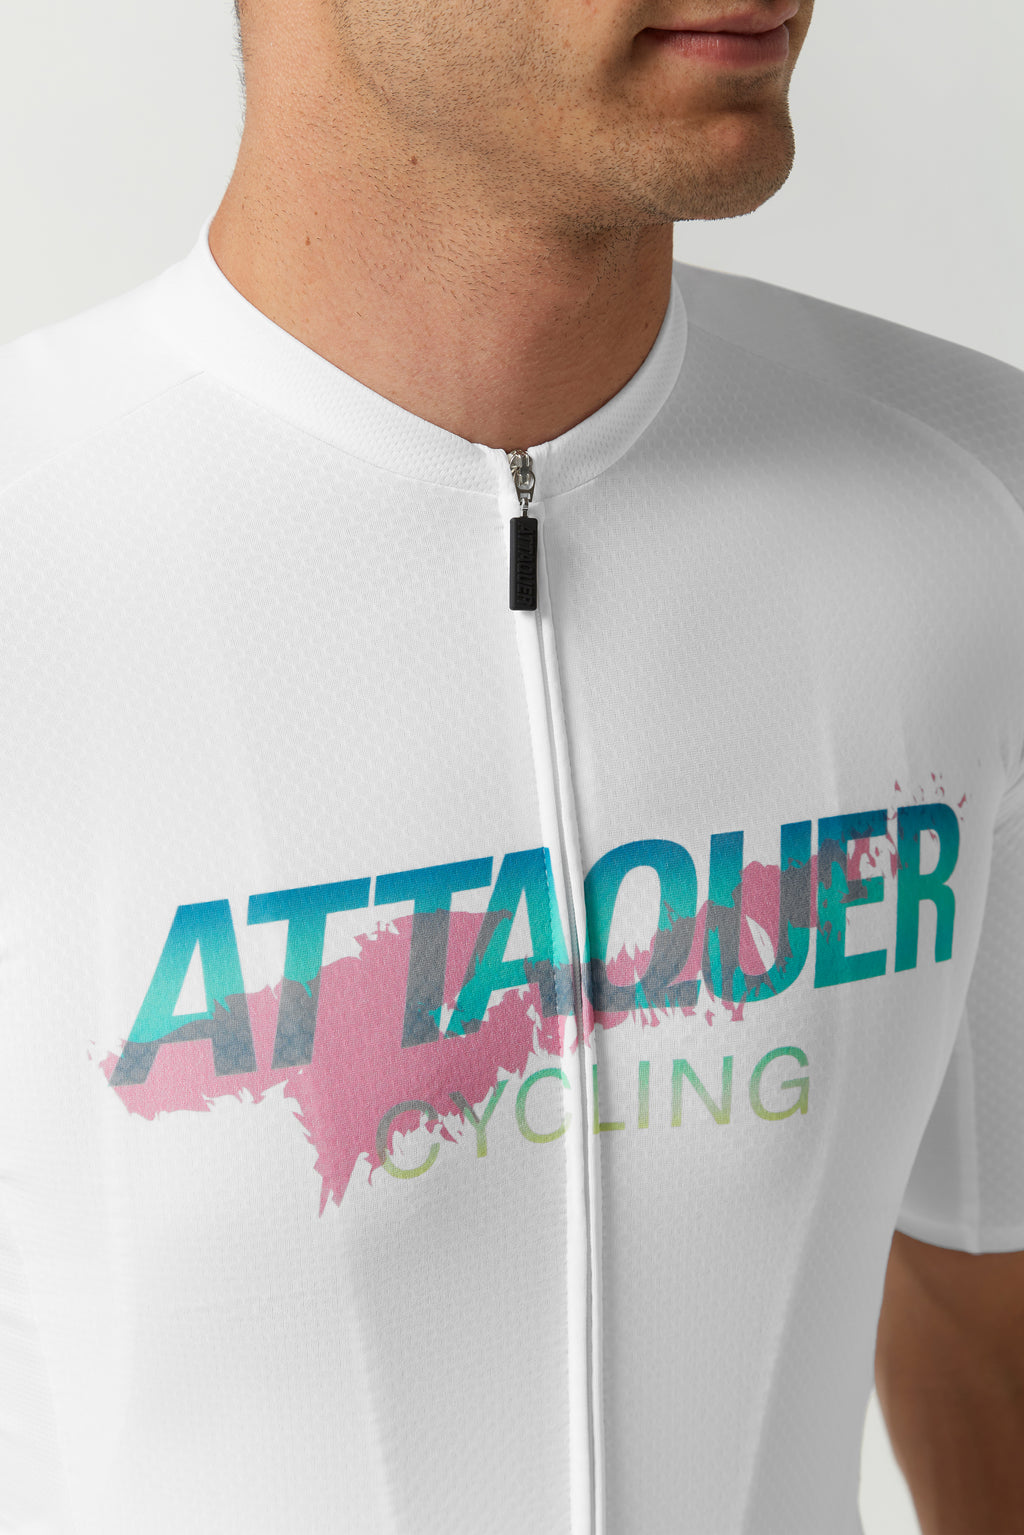 All Day Overspray Jersey White/Teal/Dirty Pink